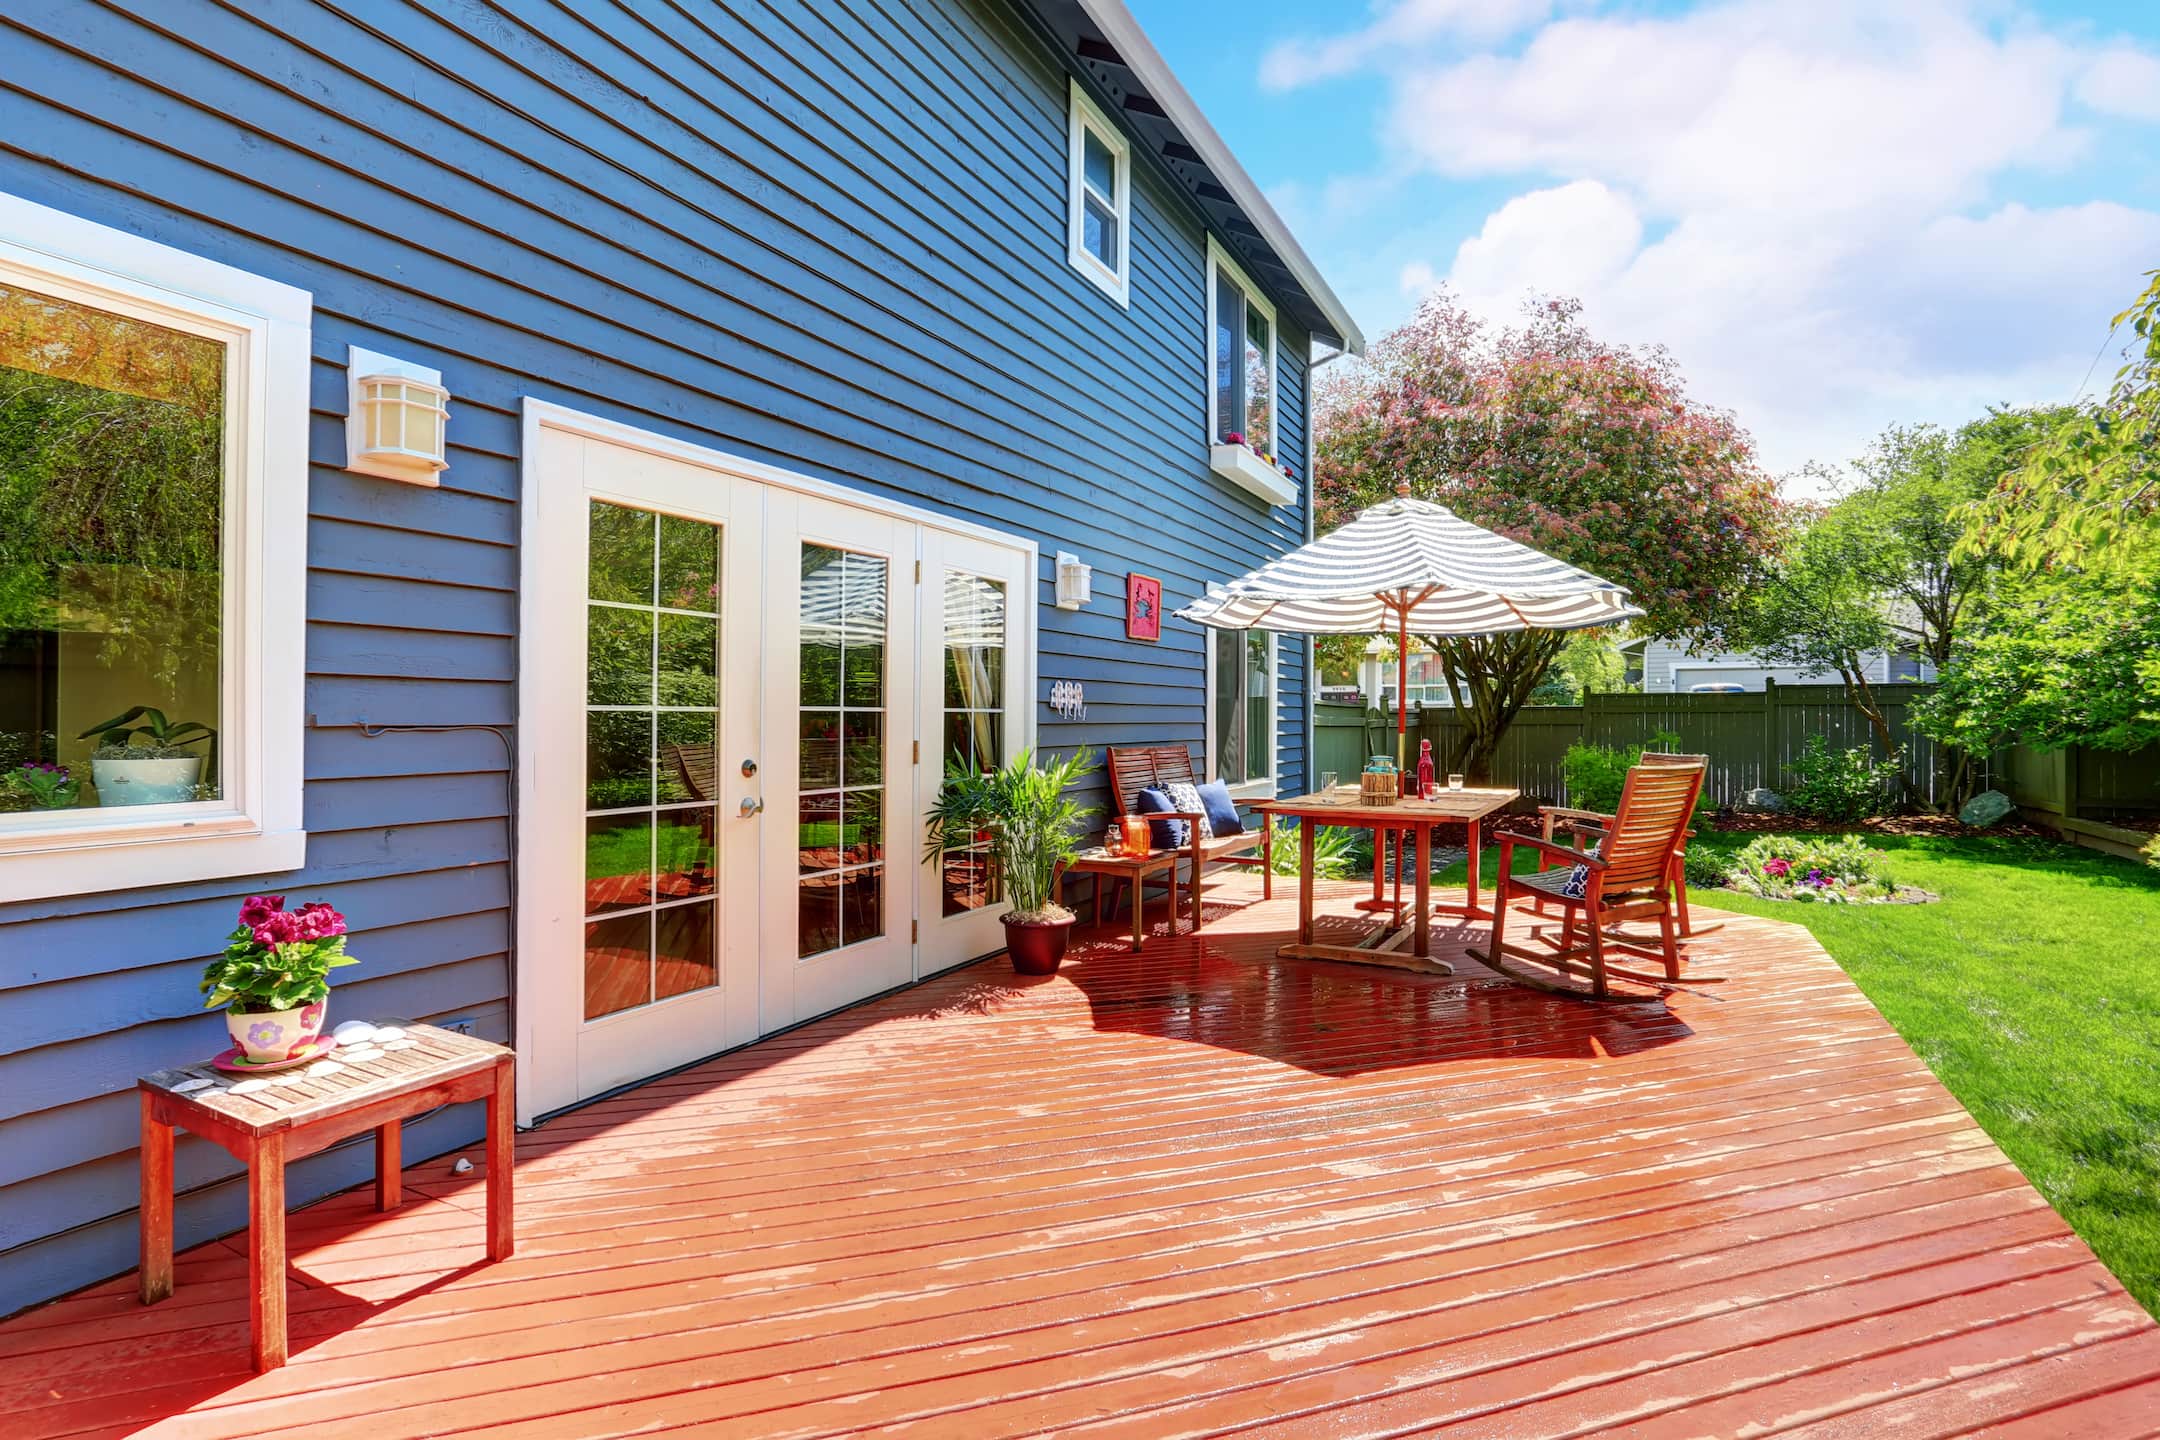 5 Types Of Siding To Consider For Your Home